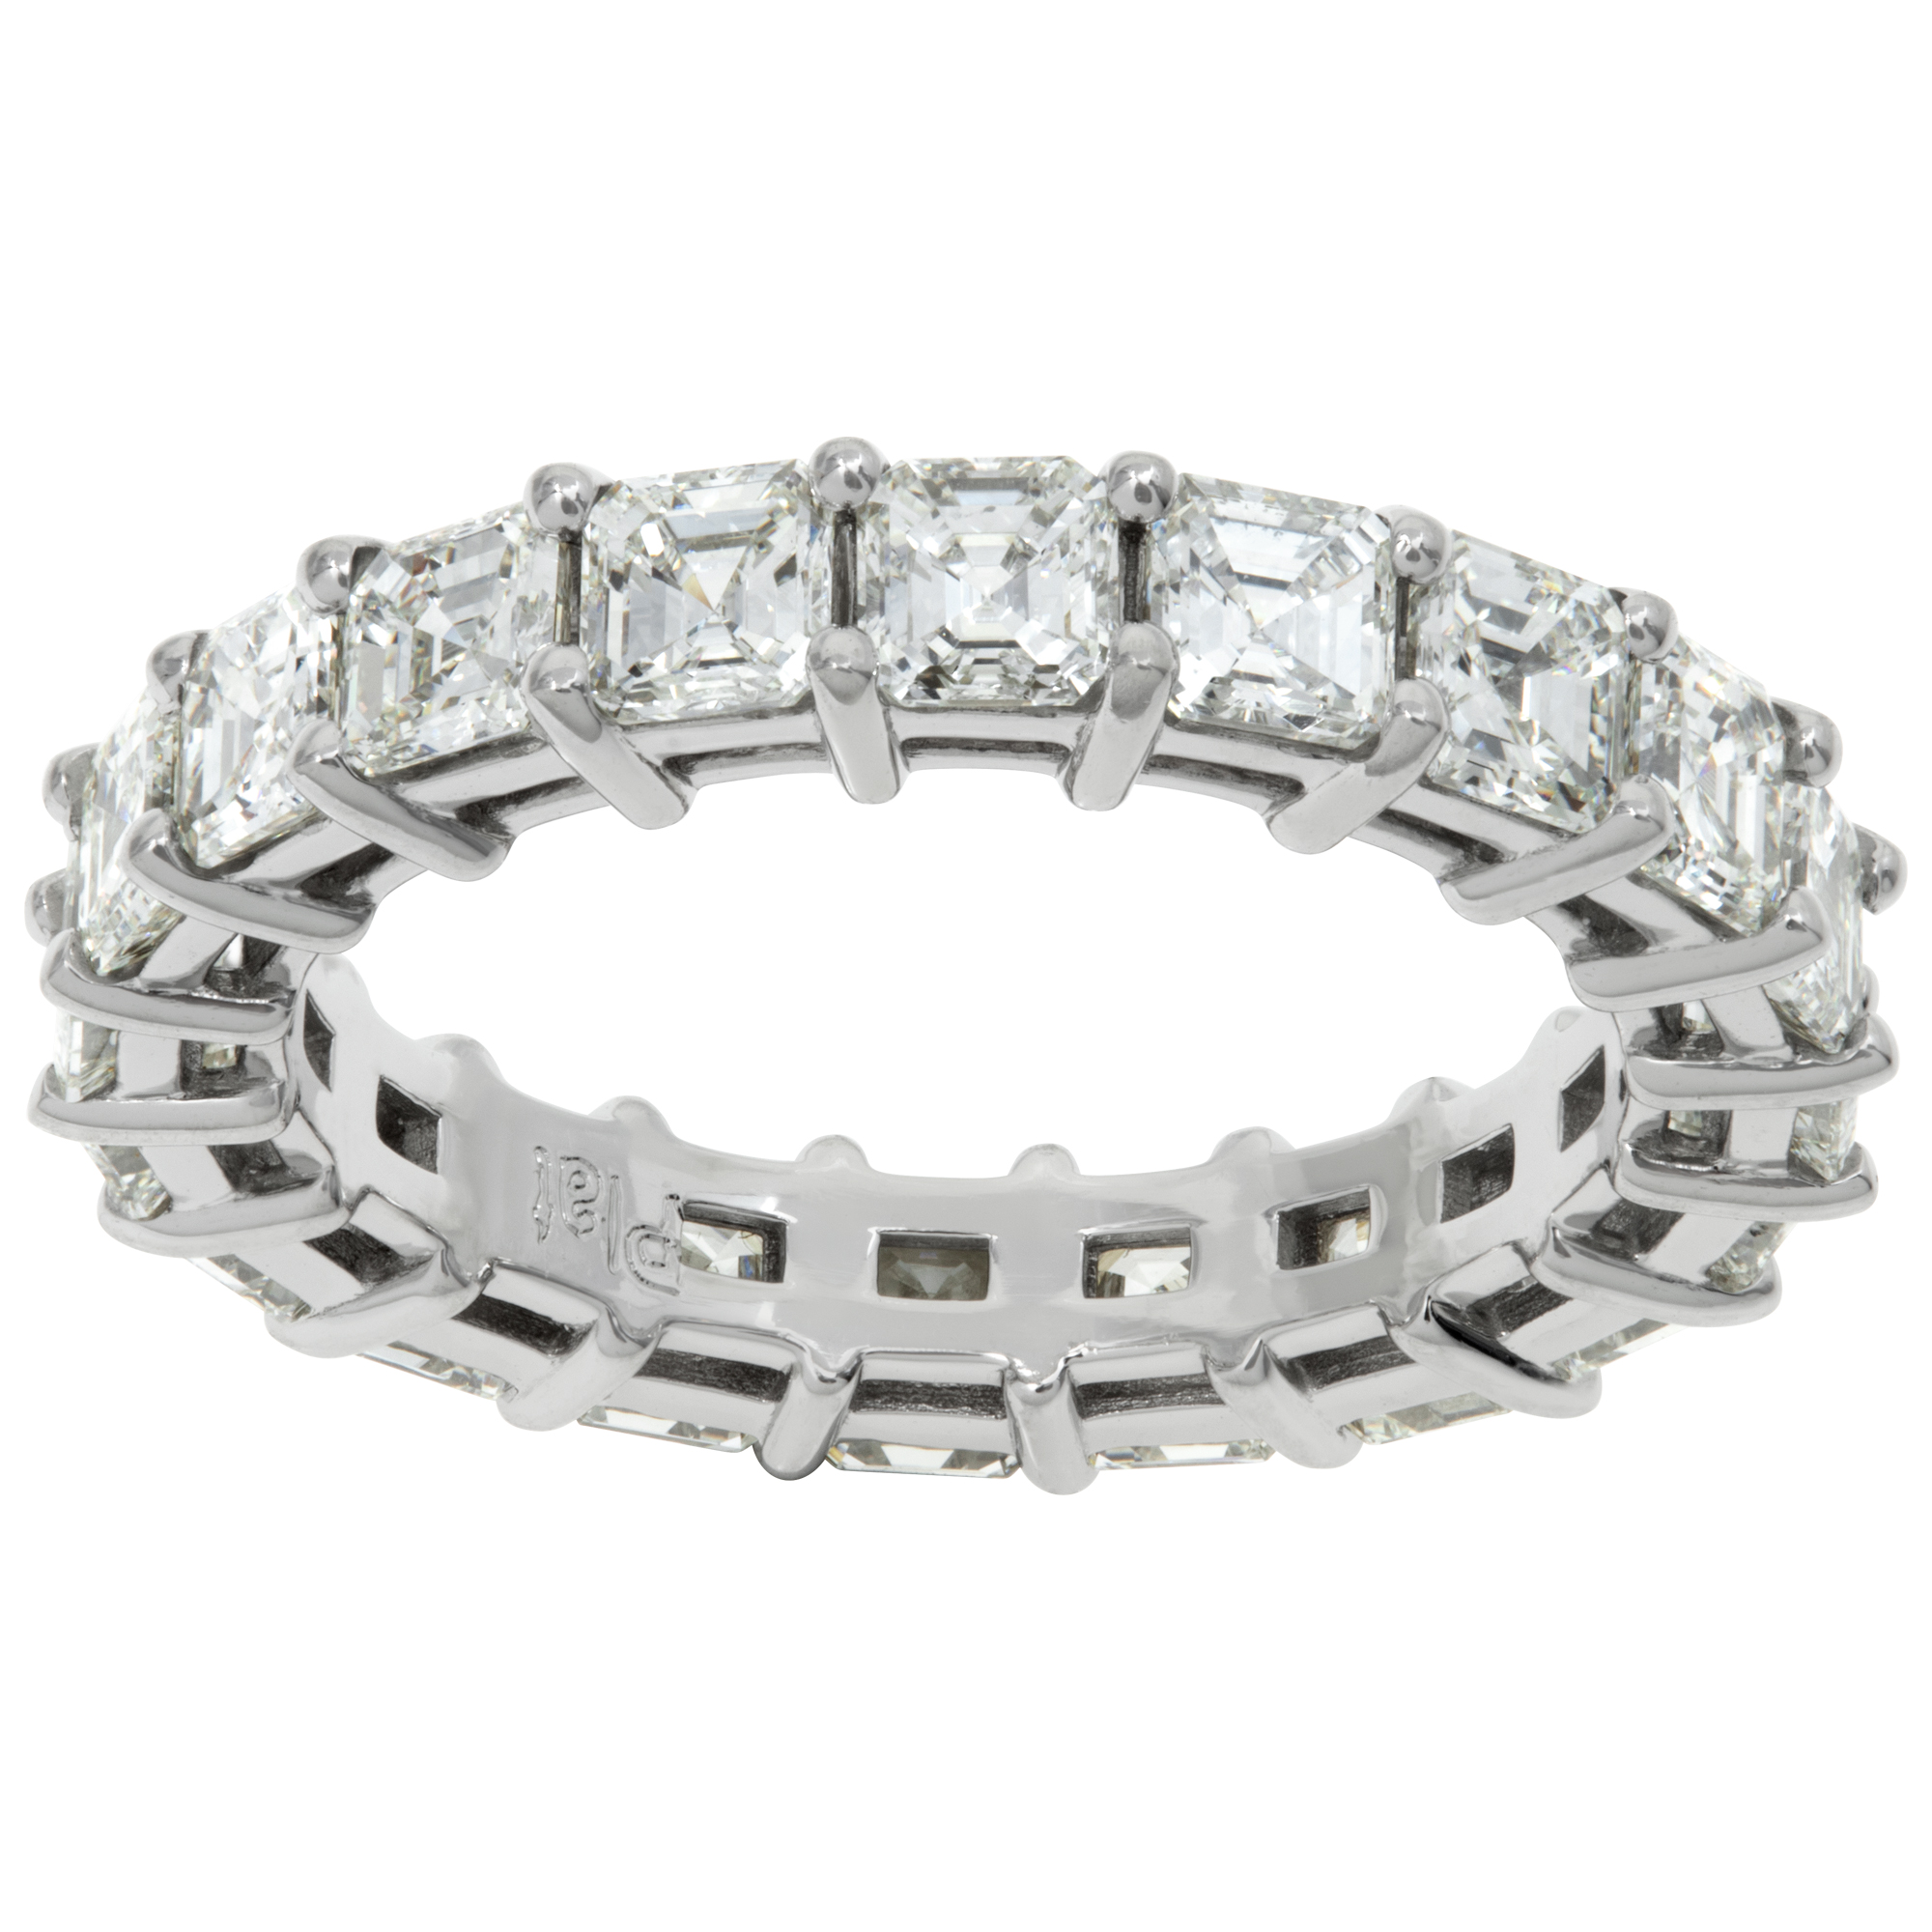 Ascher cut diamond eternity band in platinum with approximately 4.00 carats in diamonds. Size 6